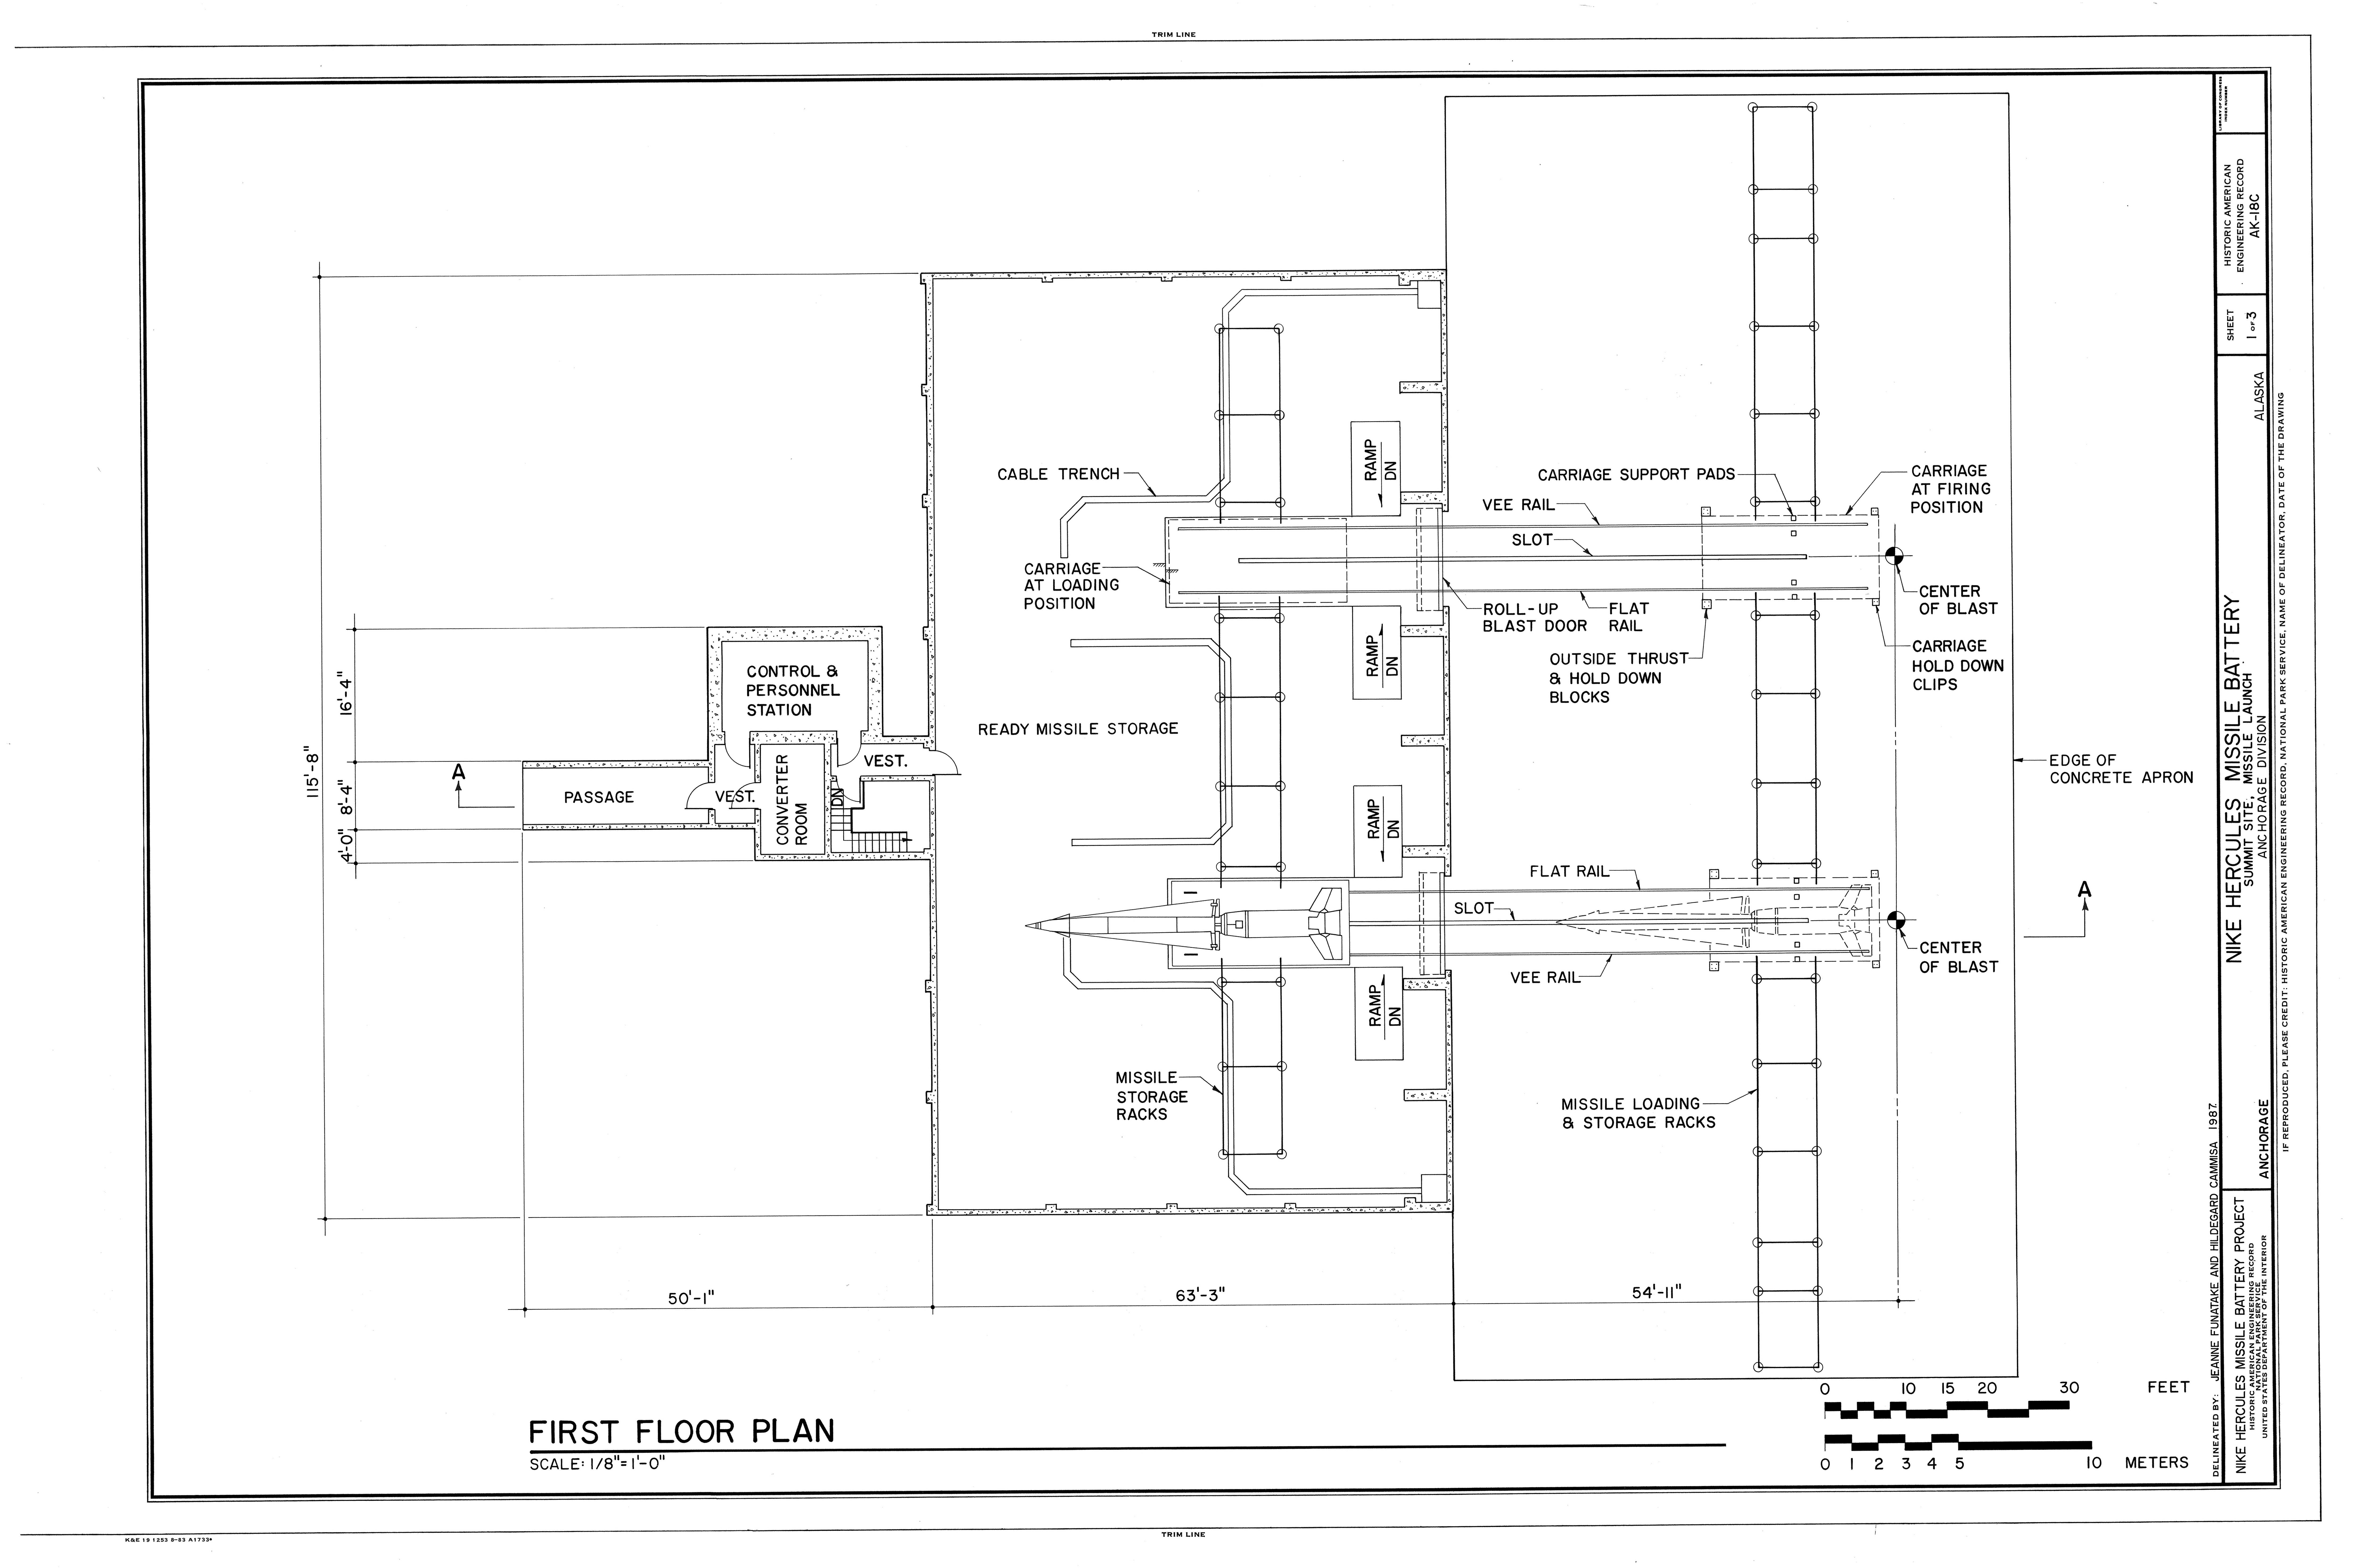 First Floor Plan - Nike Hercules Missile Battery Summit Site, Missile Launch, Anchorage, Anchorage, AK HAER AK,2-ANCH,24C- (sheet 1 of 3)